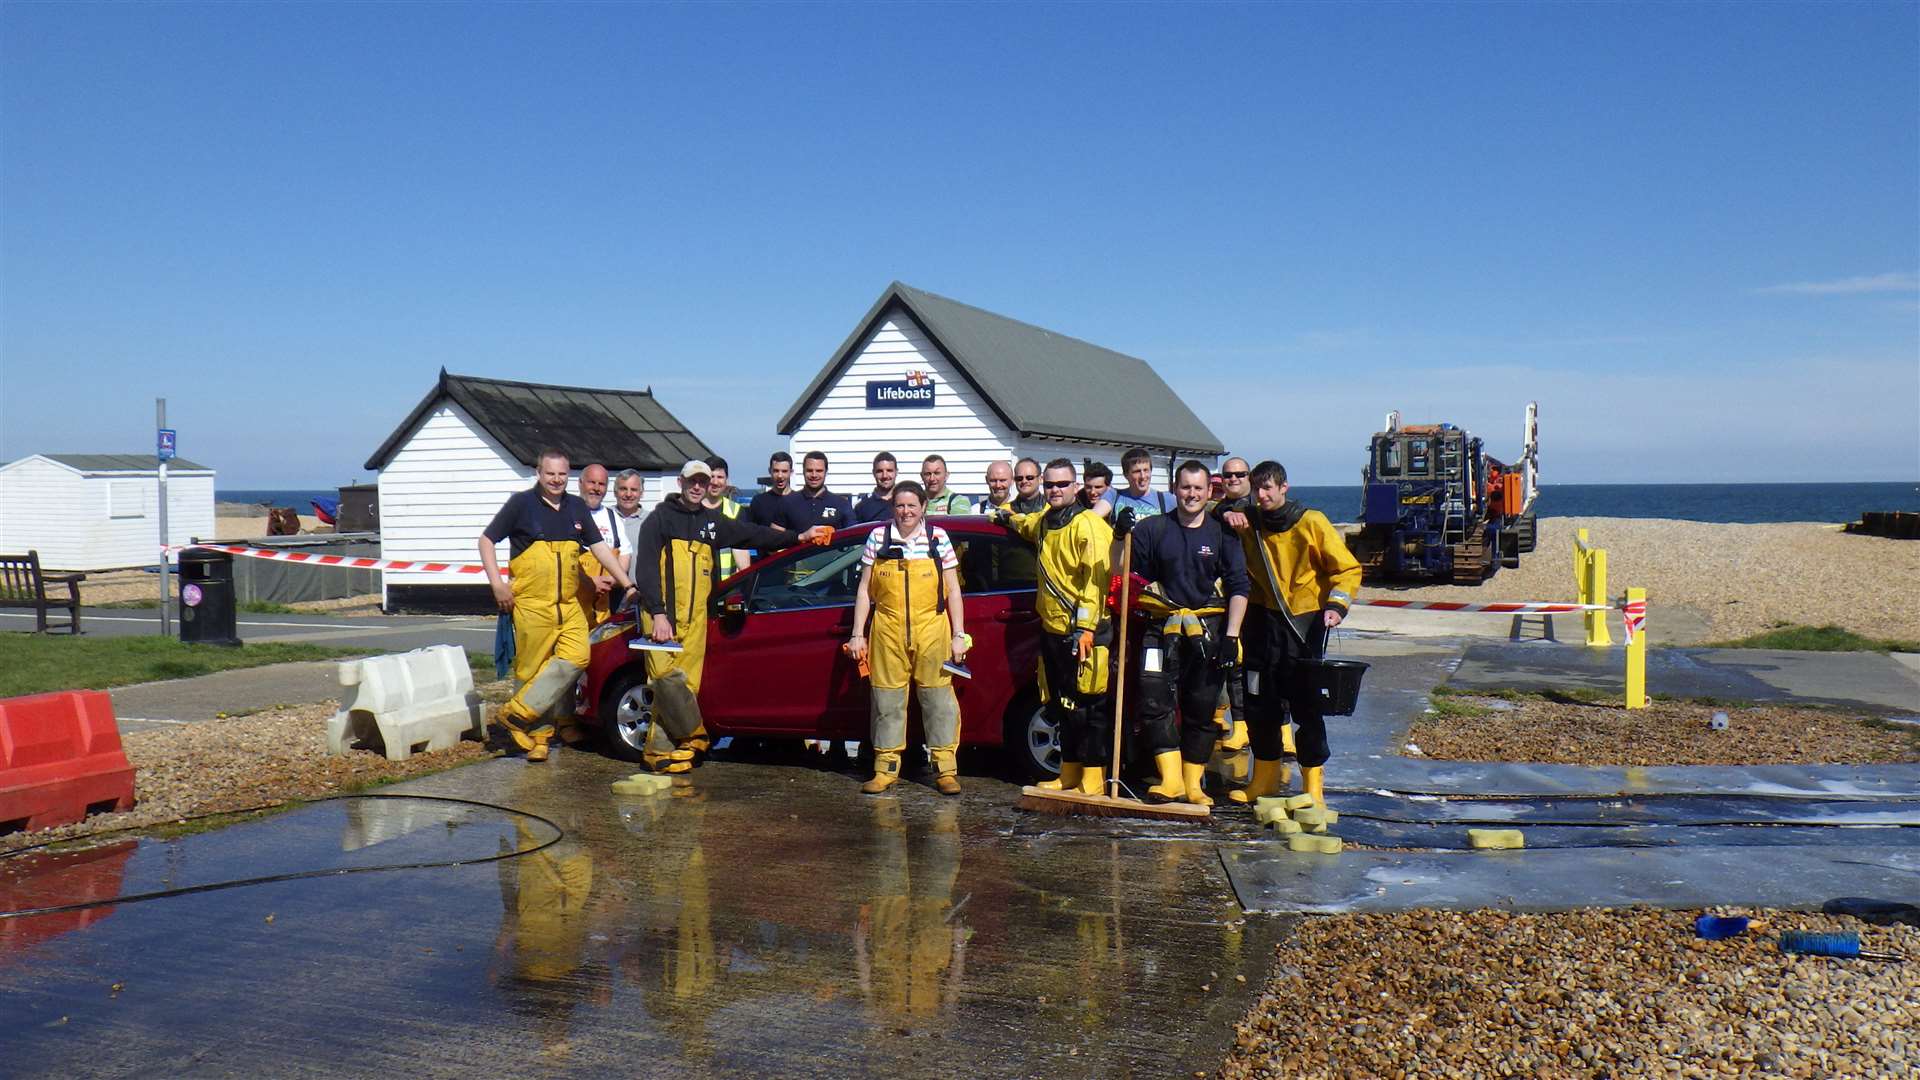 Cash will be raised for the RNLI in fundraisers like the popular car wash by volunteer crew members